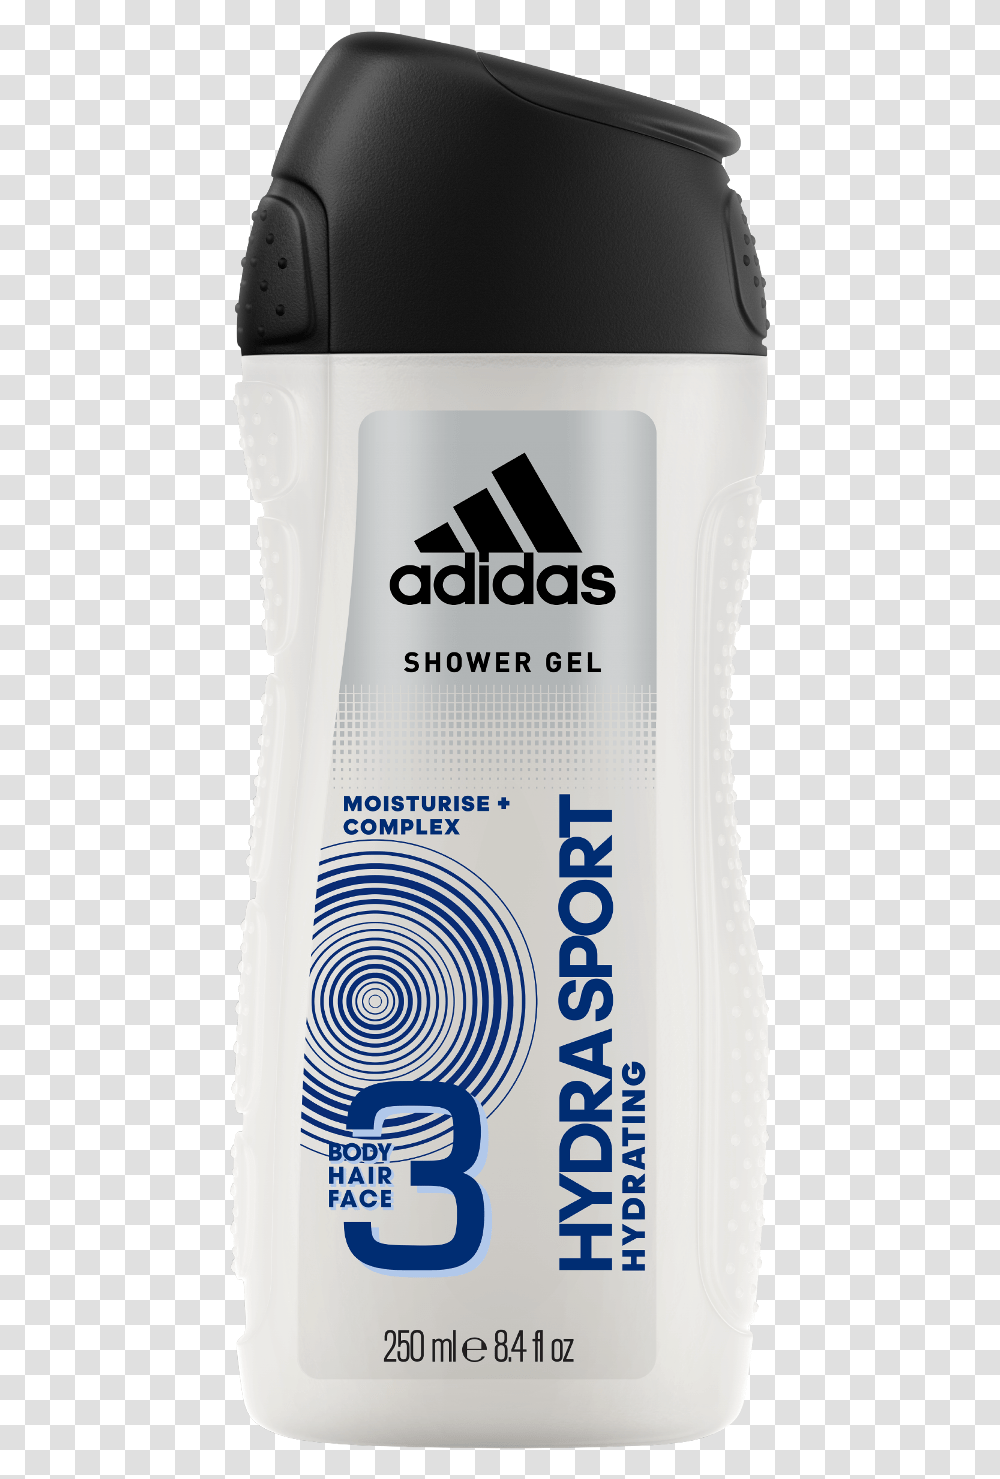 Hydra Sport 3in1 Body Hair And Face Shower Gel For Adidas Active Start Shower Gel, Bottle, Cosmetics, Mobile Phone, Electronics Transparent Png